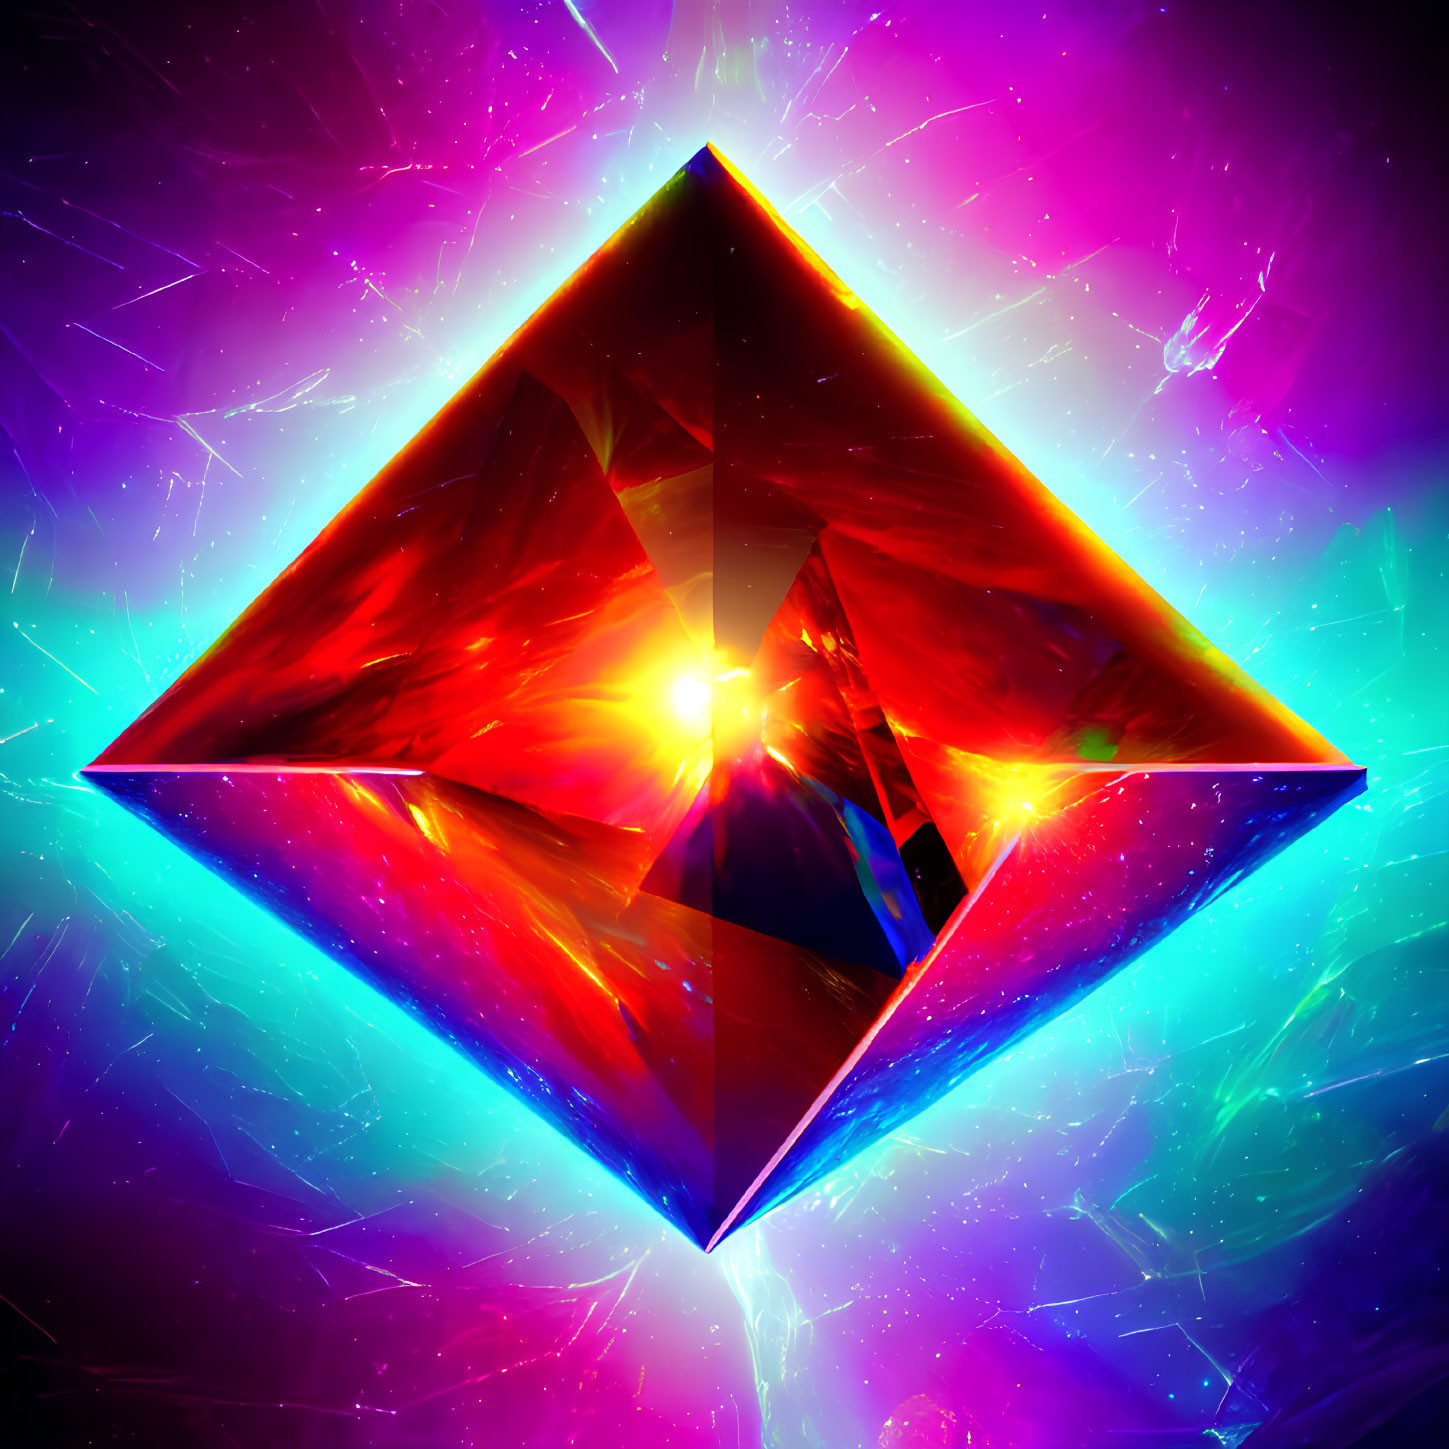 Vivid 3D-rendered red crystal pyramid in colorful space background